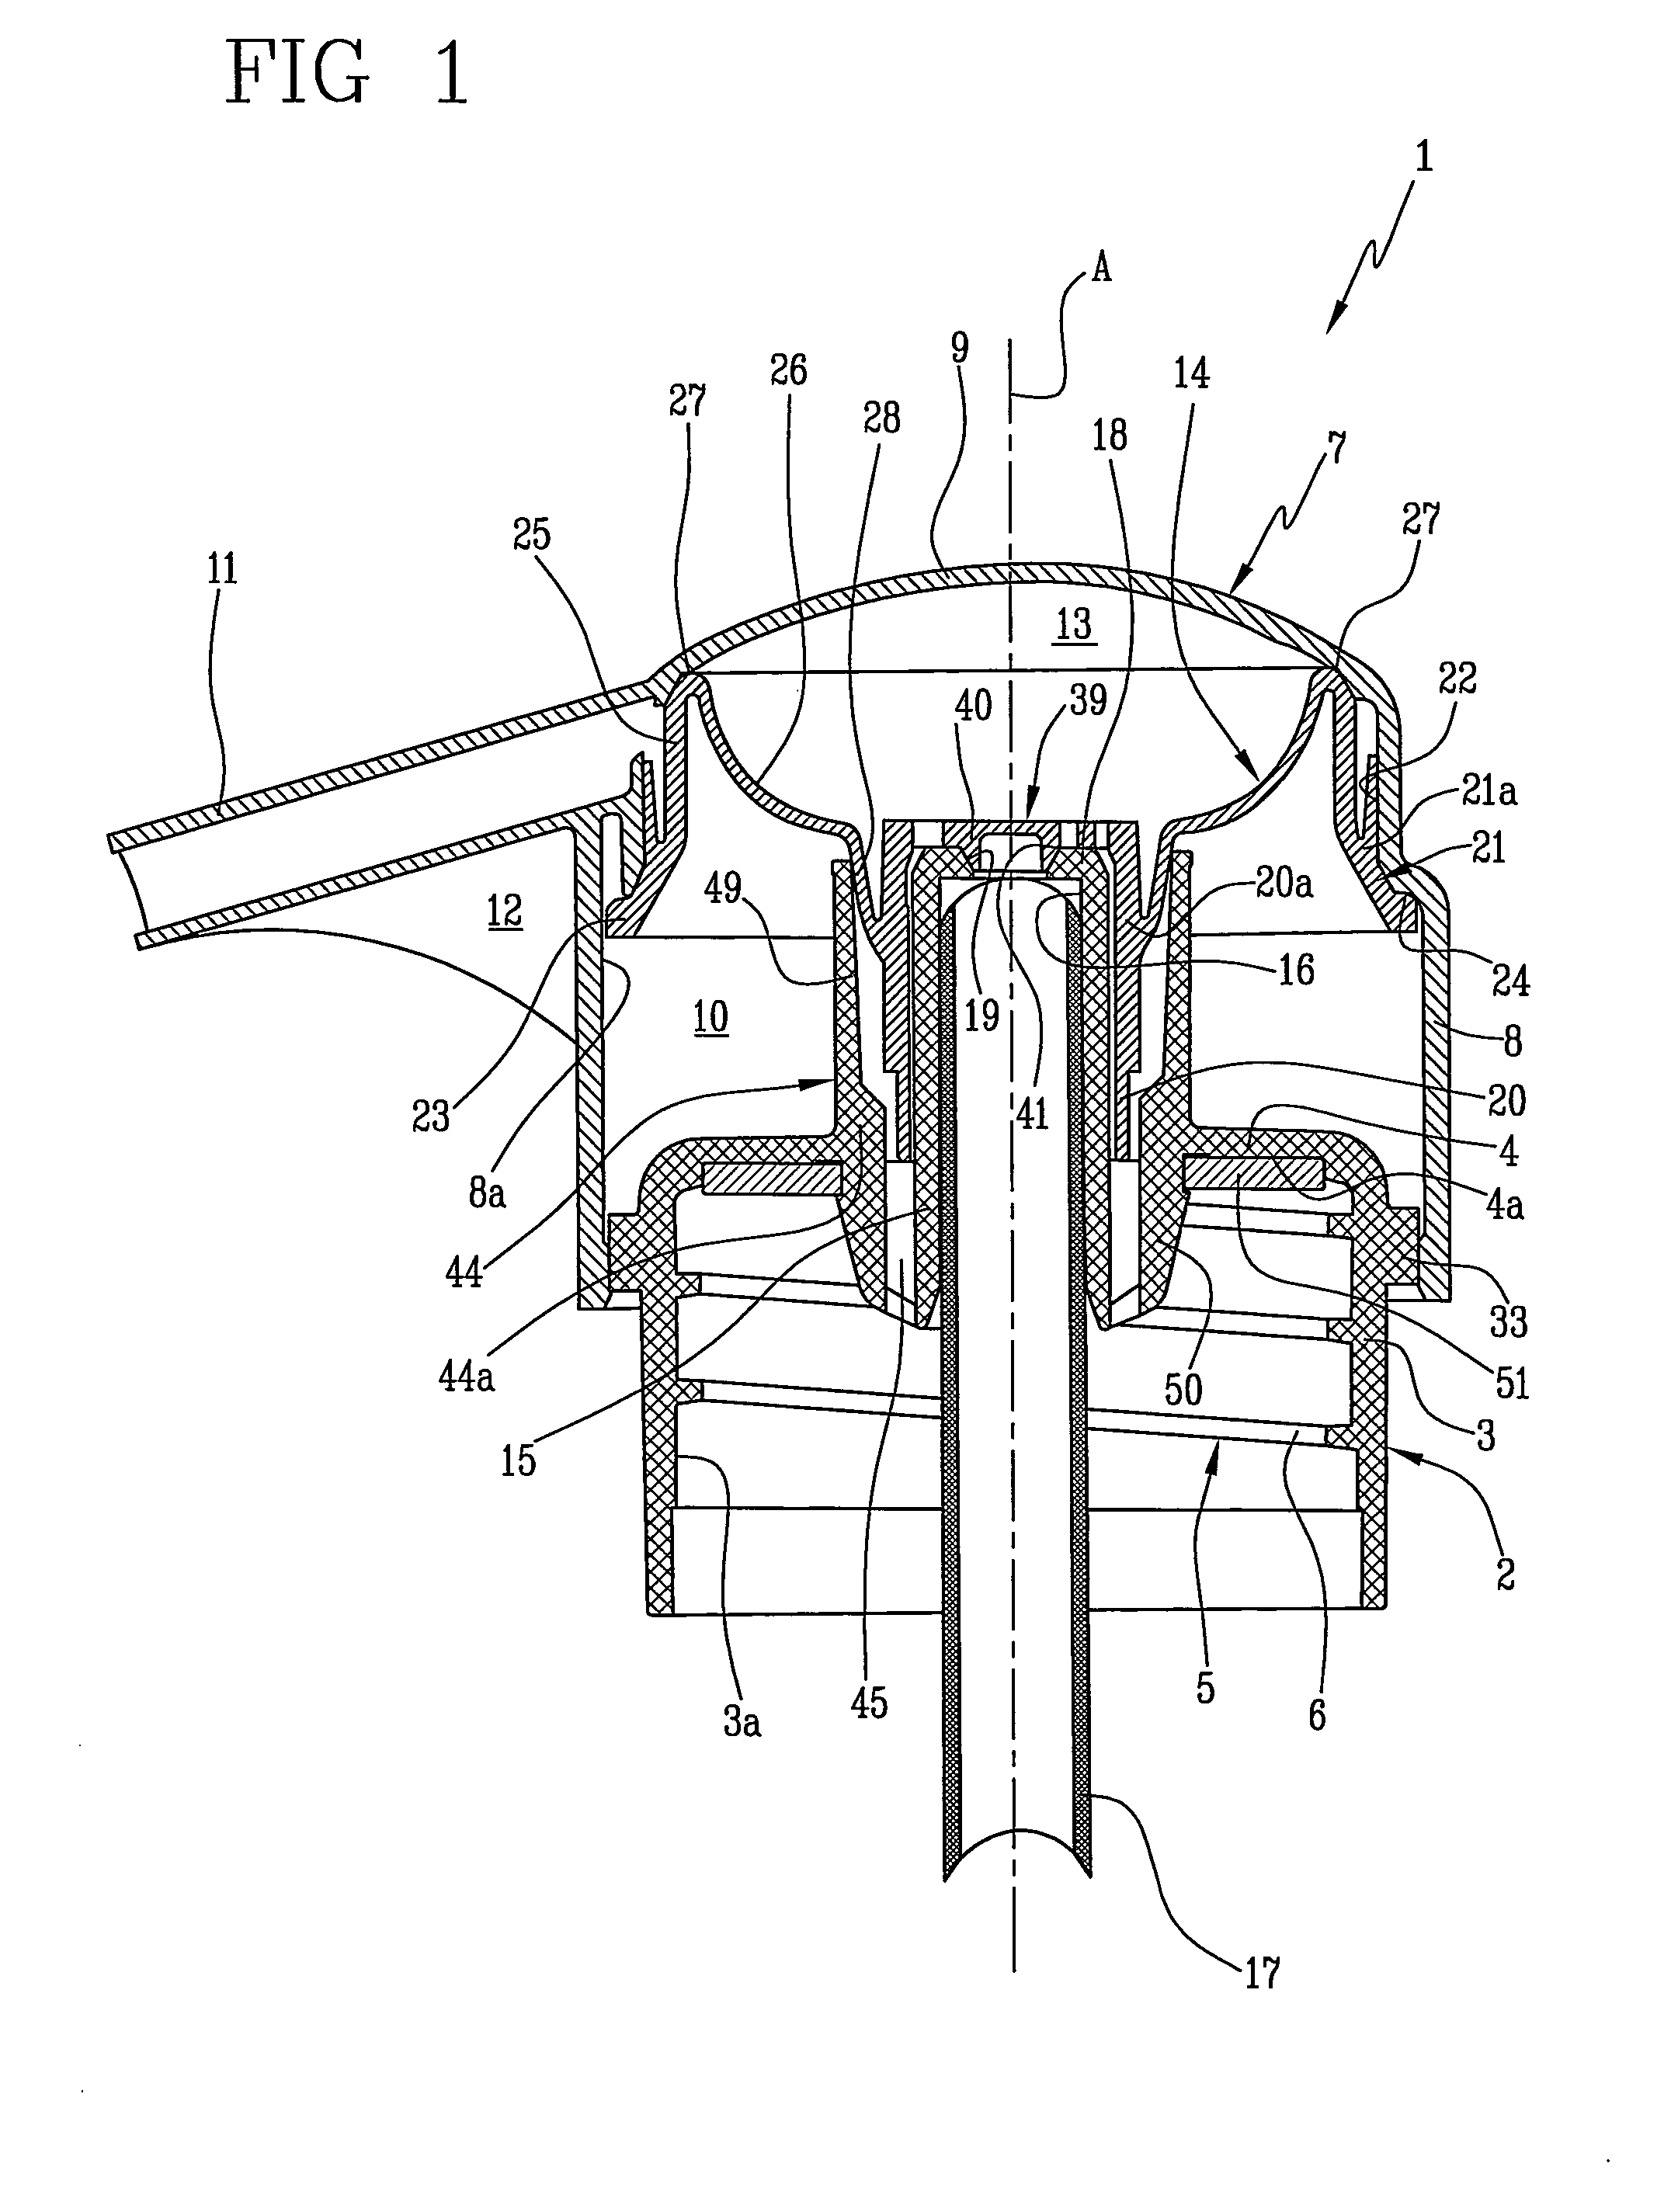 Dispenser of fluid products